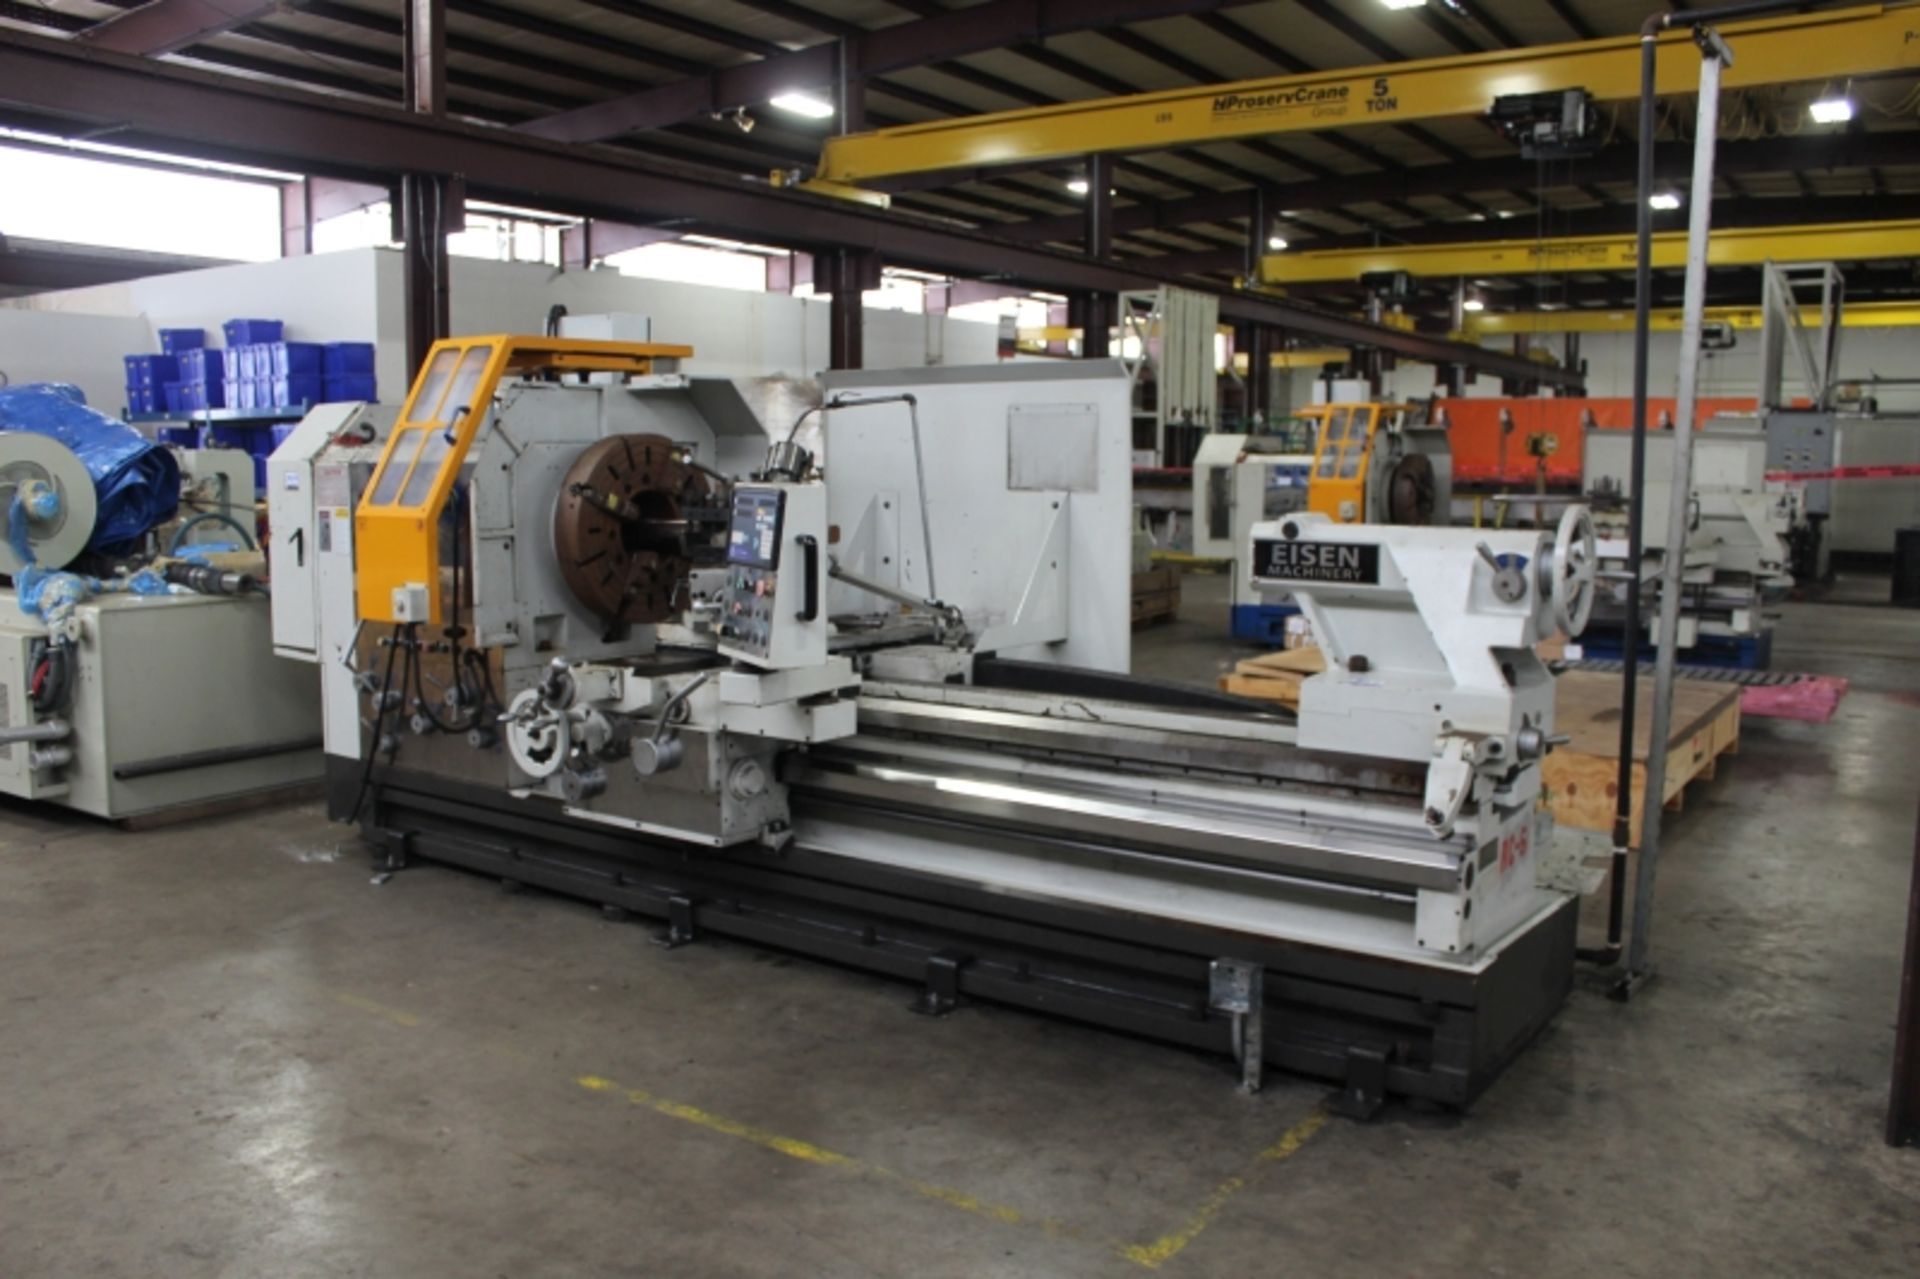 35” x 80” Eisen PA3580 Hollow Spindle Engine Lathe, 10” spindle bore - Image 3 of 8